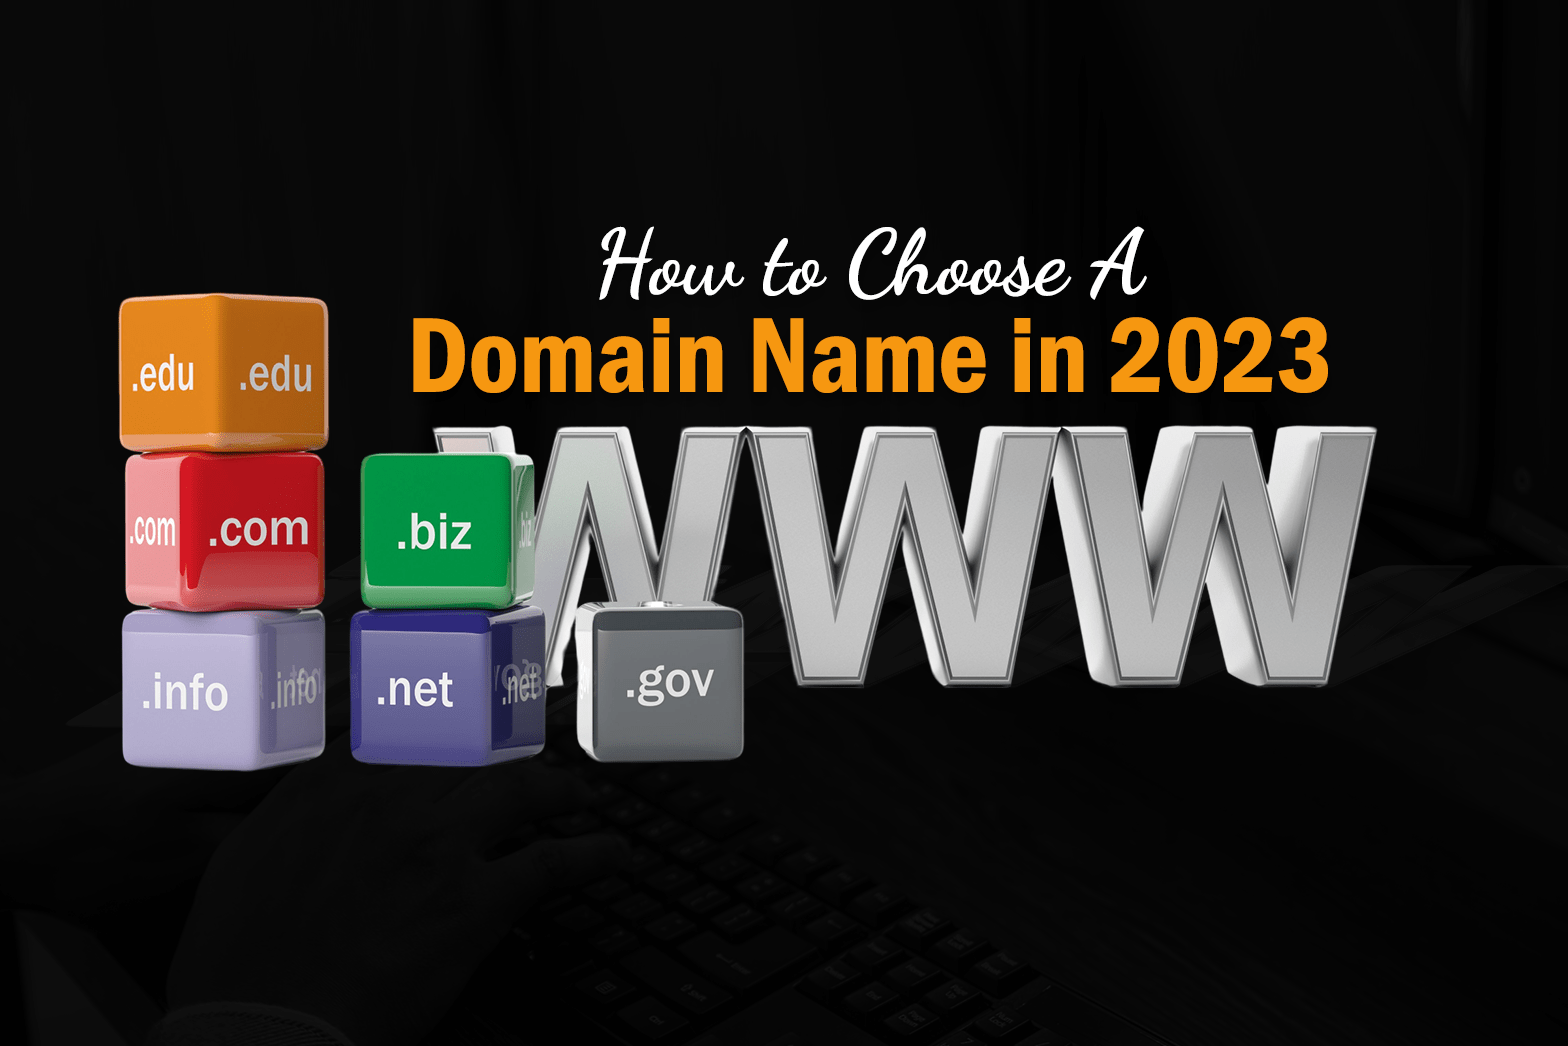 How to Choose a Domain Name in 2023